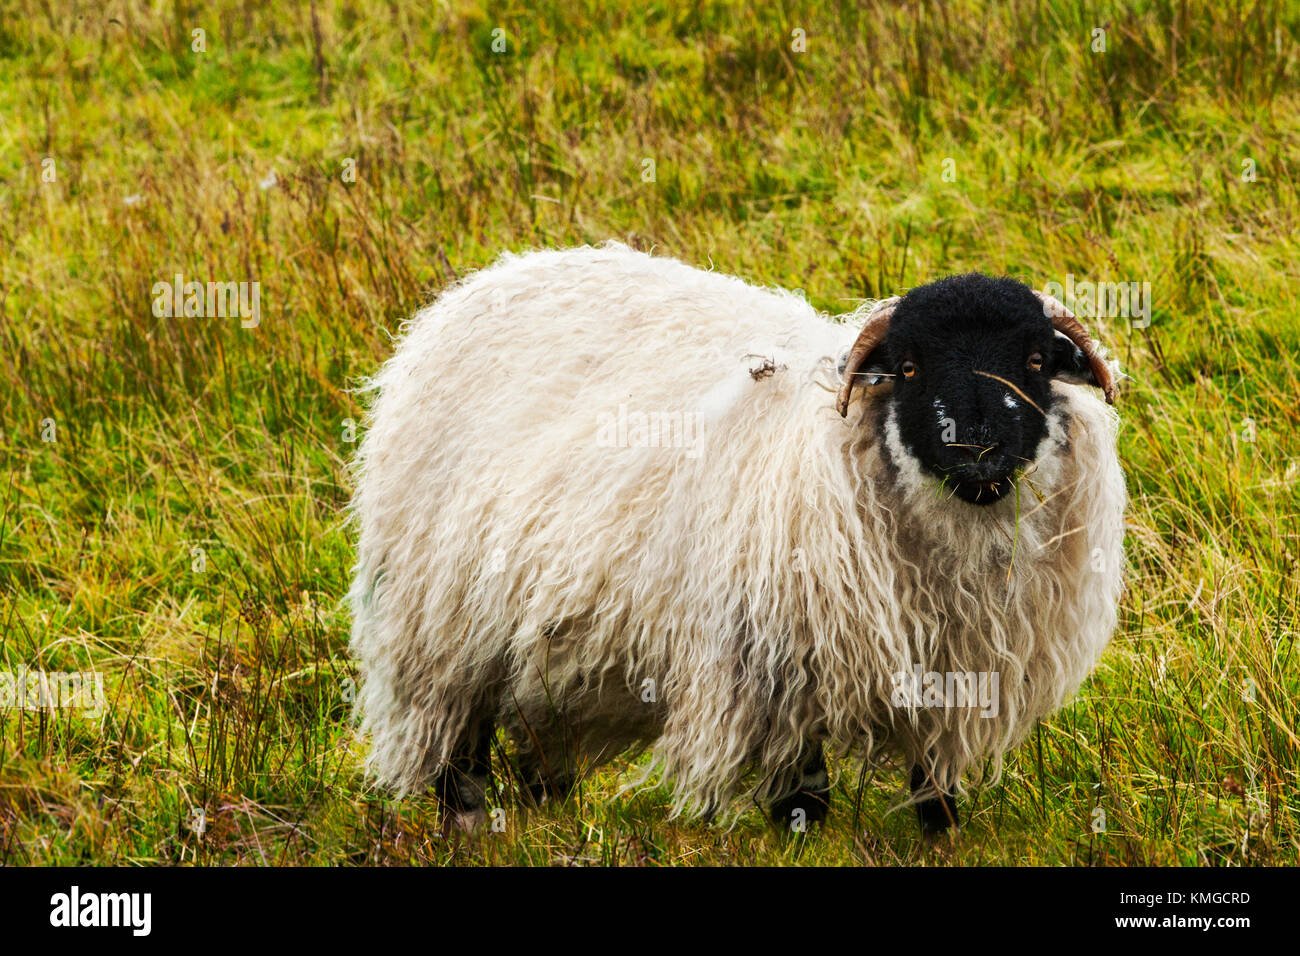 Black faced Sheep grazing on moorland grass Nidderdale North Yorkshire. Stock Photo